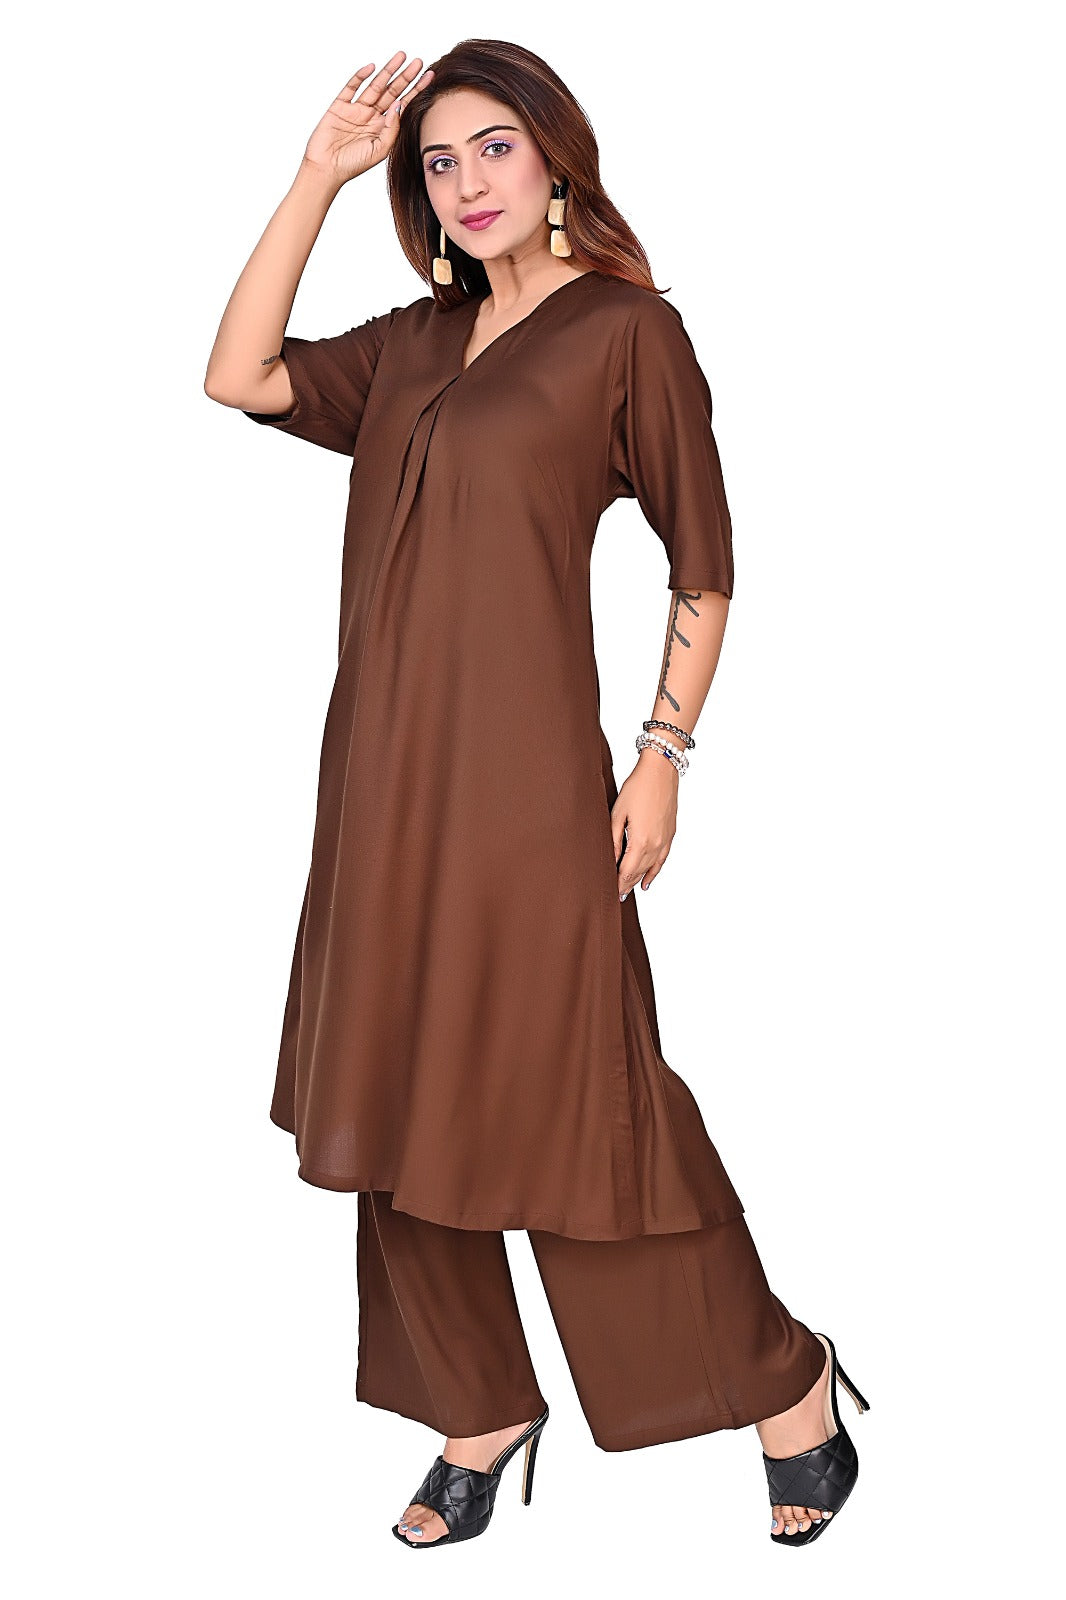 Nirmal online Rayon Premium quality fabric co-ord set kurti for Women in Brown colour